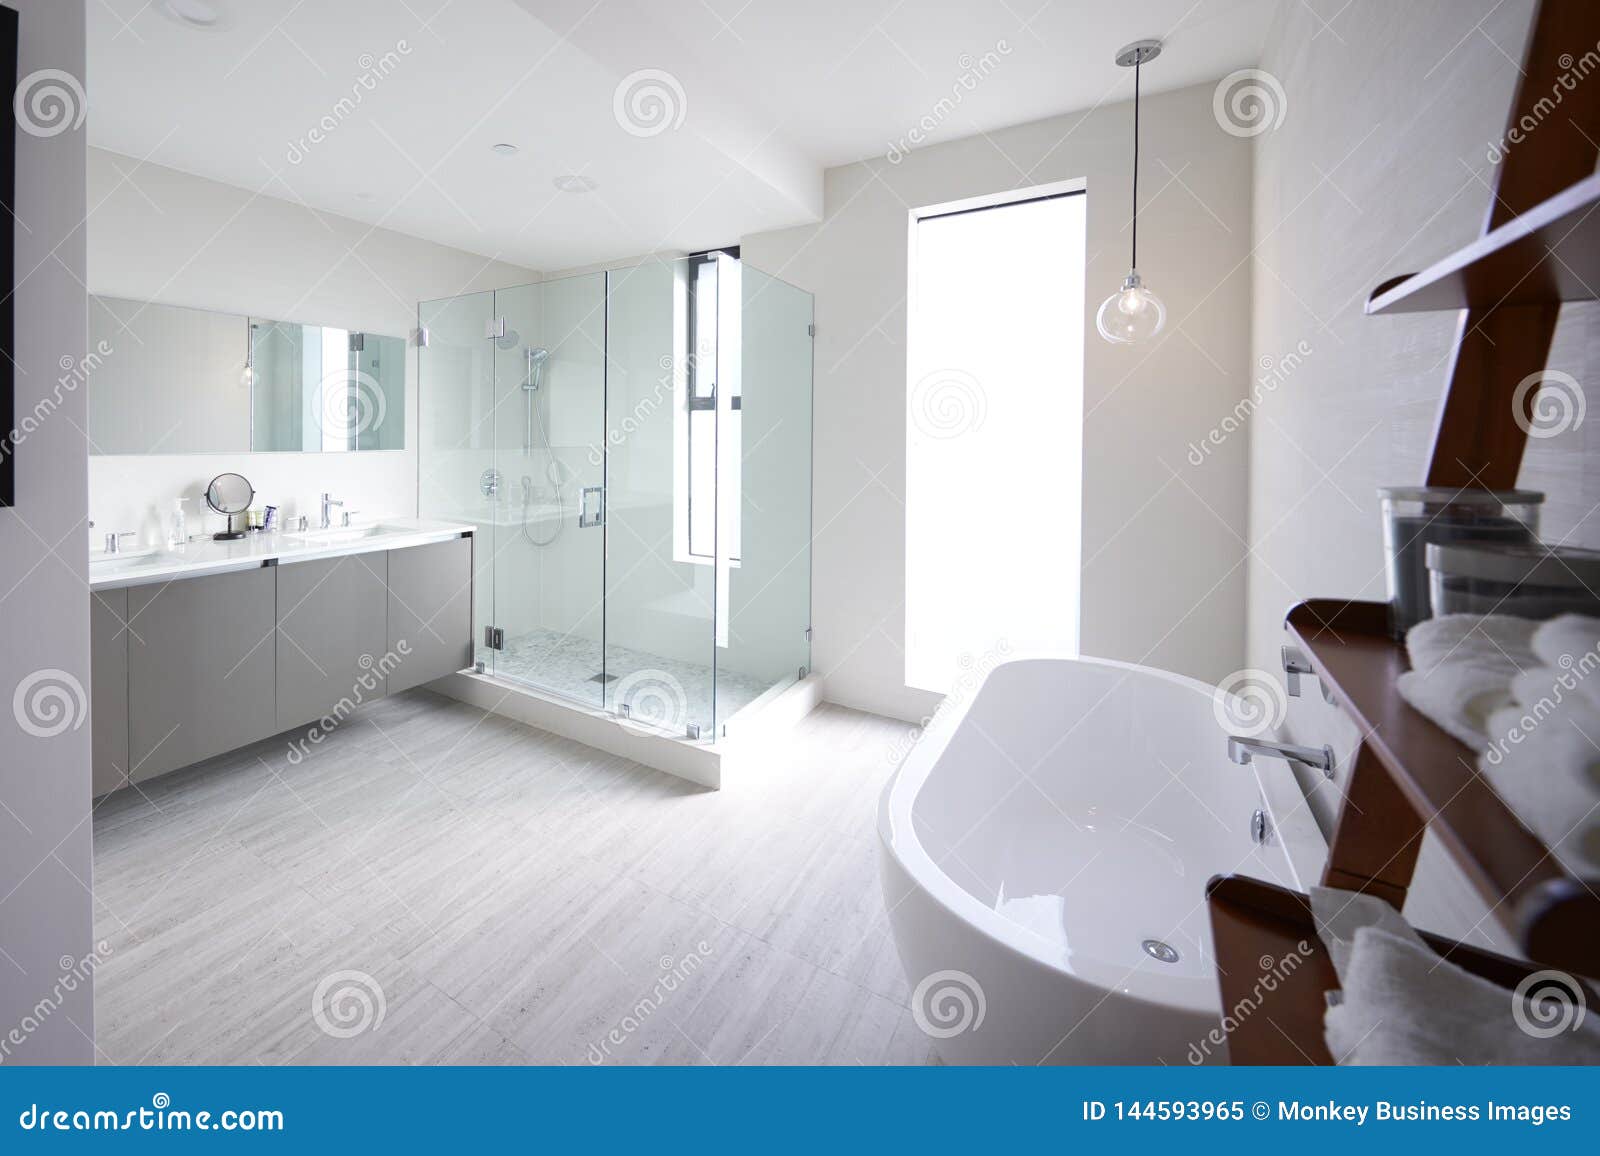 modern domestic bathroom with shower cabin and freestanding bath, sunlight, no people